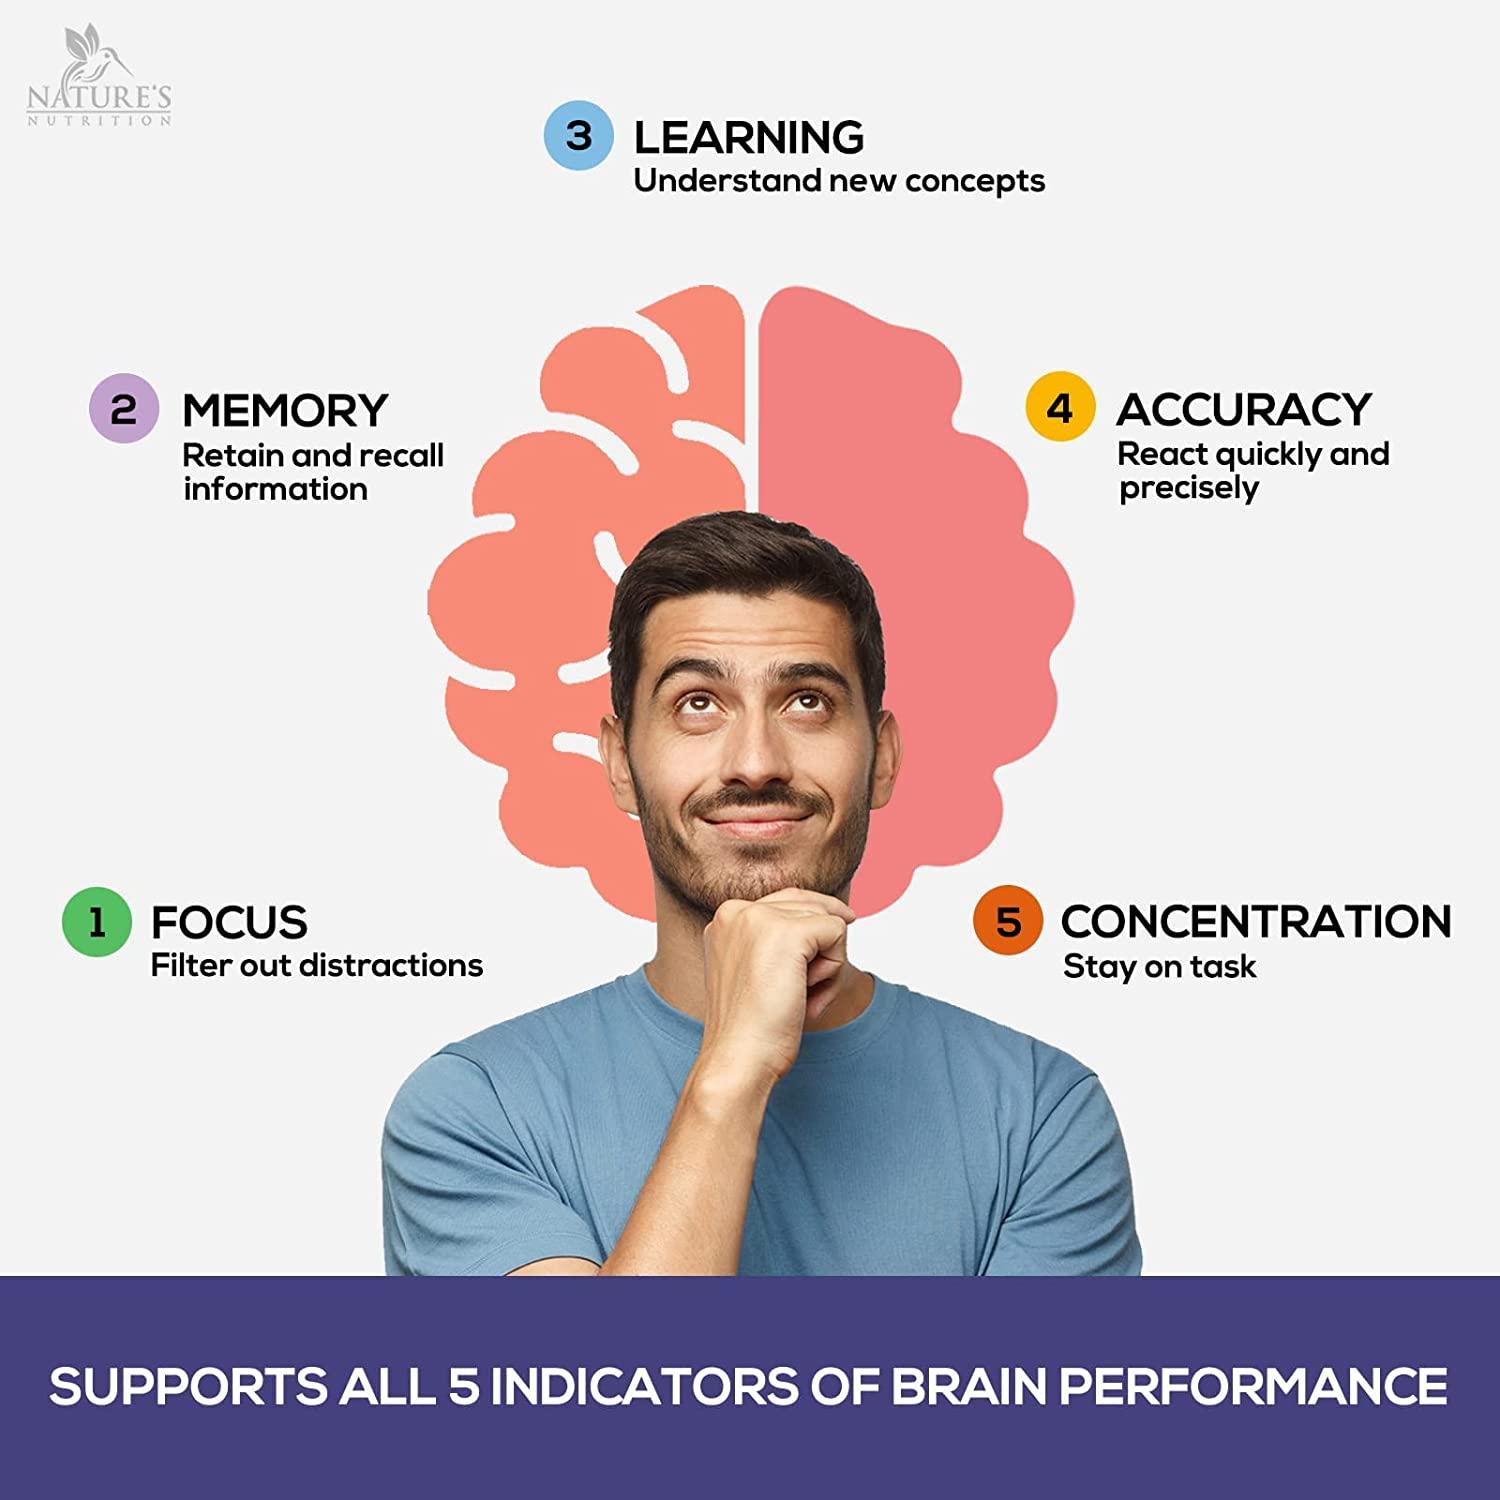 Brain Supplement - Brain Booster to Support Focus, Provide Memory